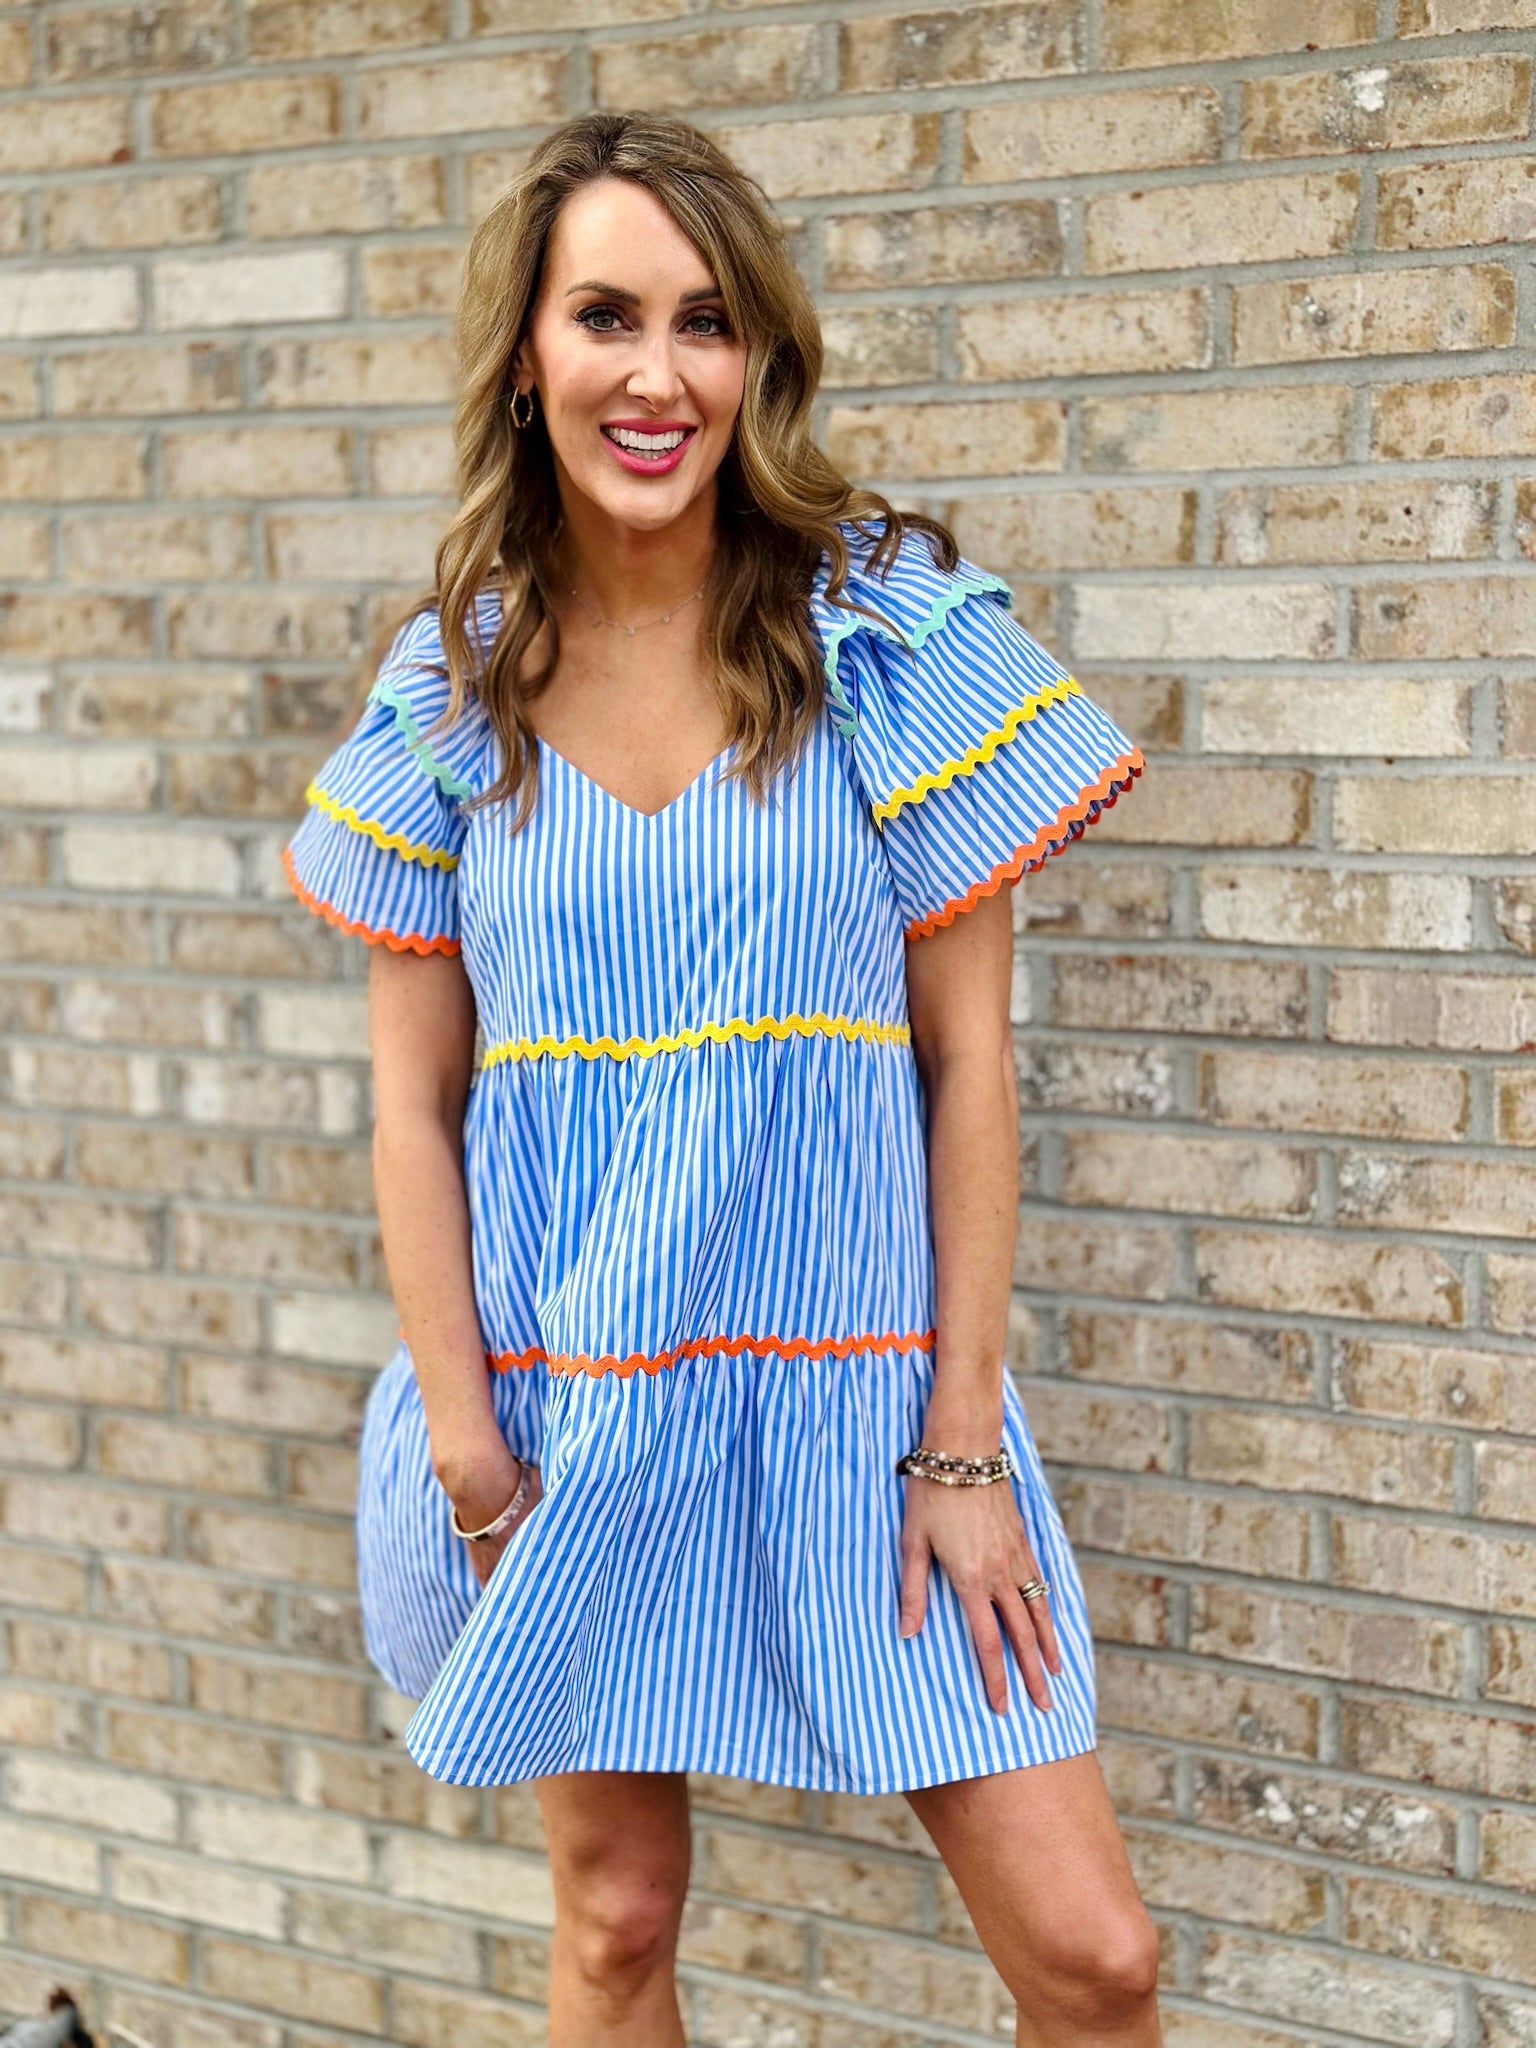 Adorable light blue and white with colorful rickrack make for a fun and playful outfit.  